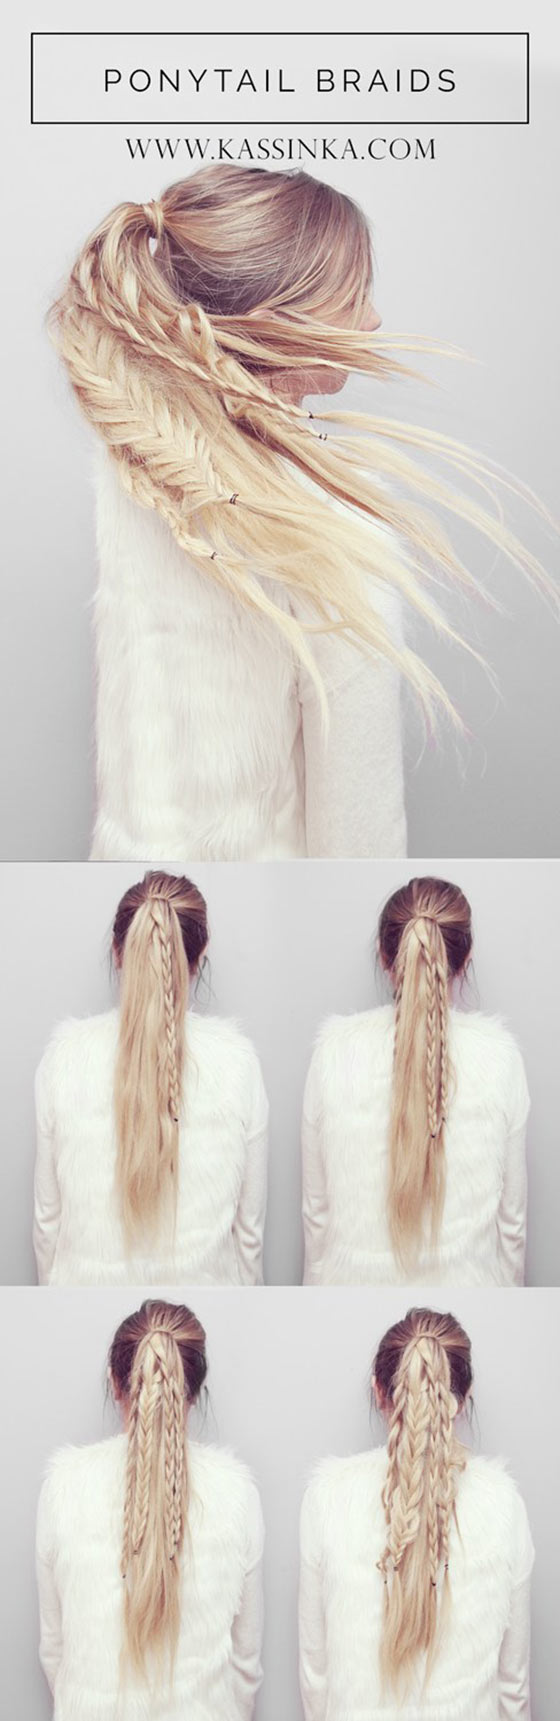 42 Braided Hairstyles For Long Hair